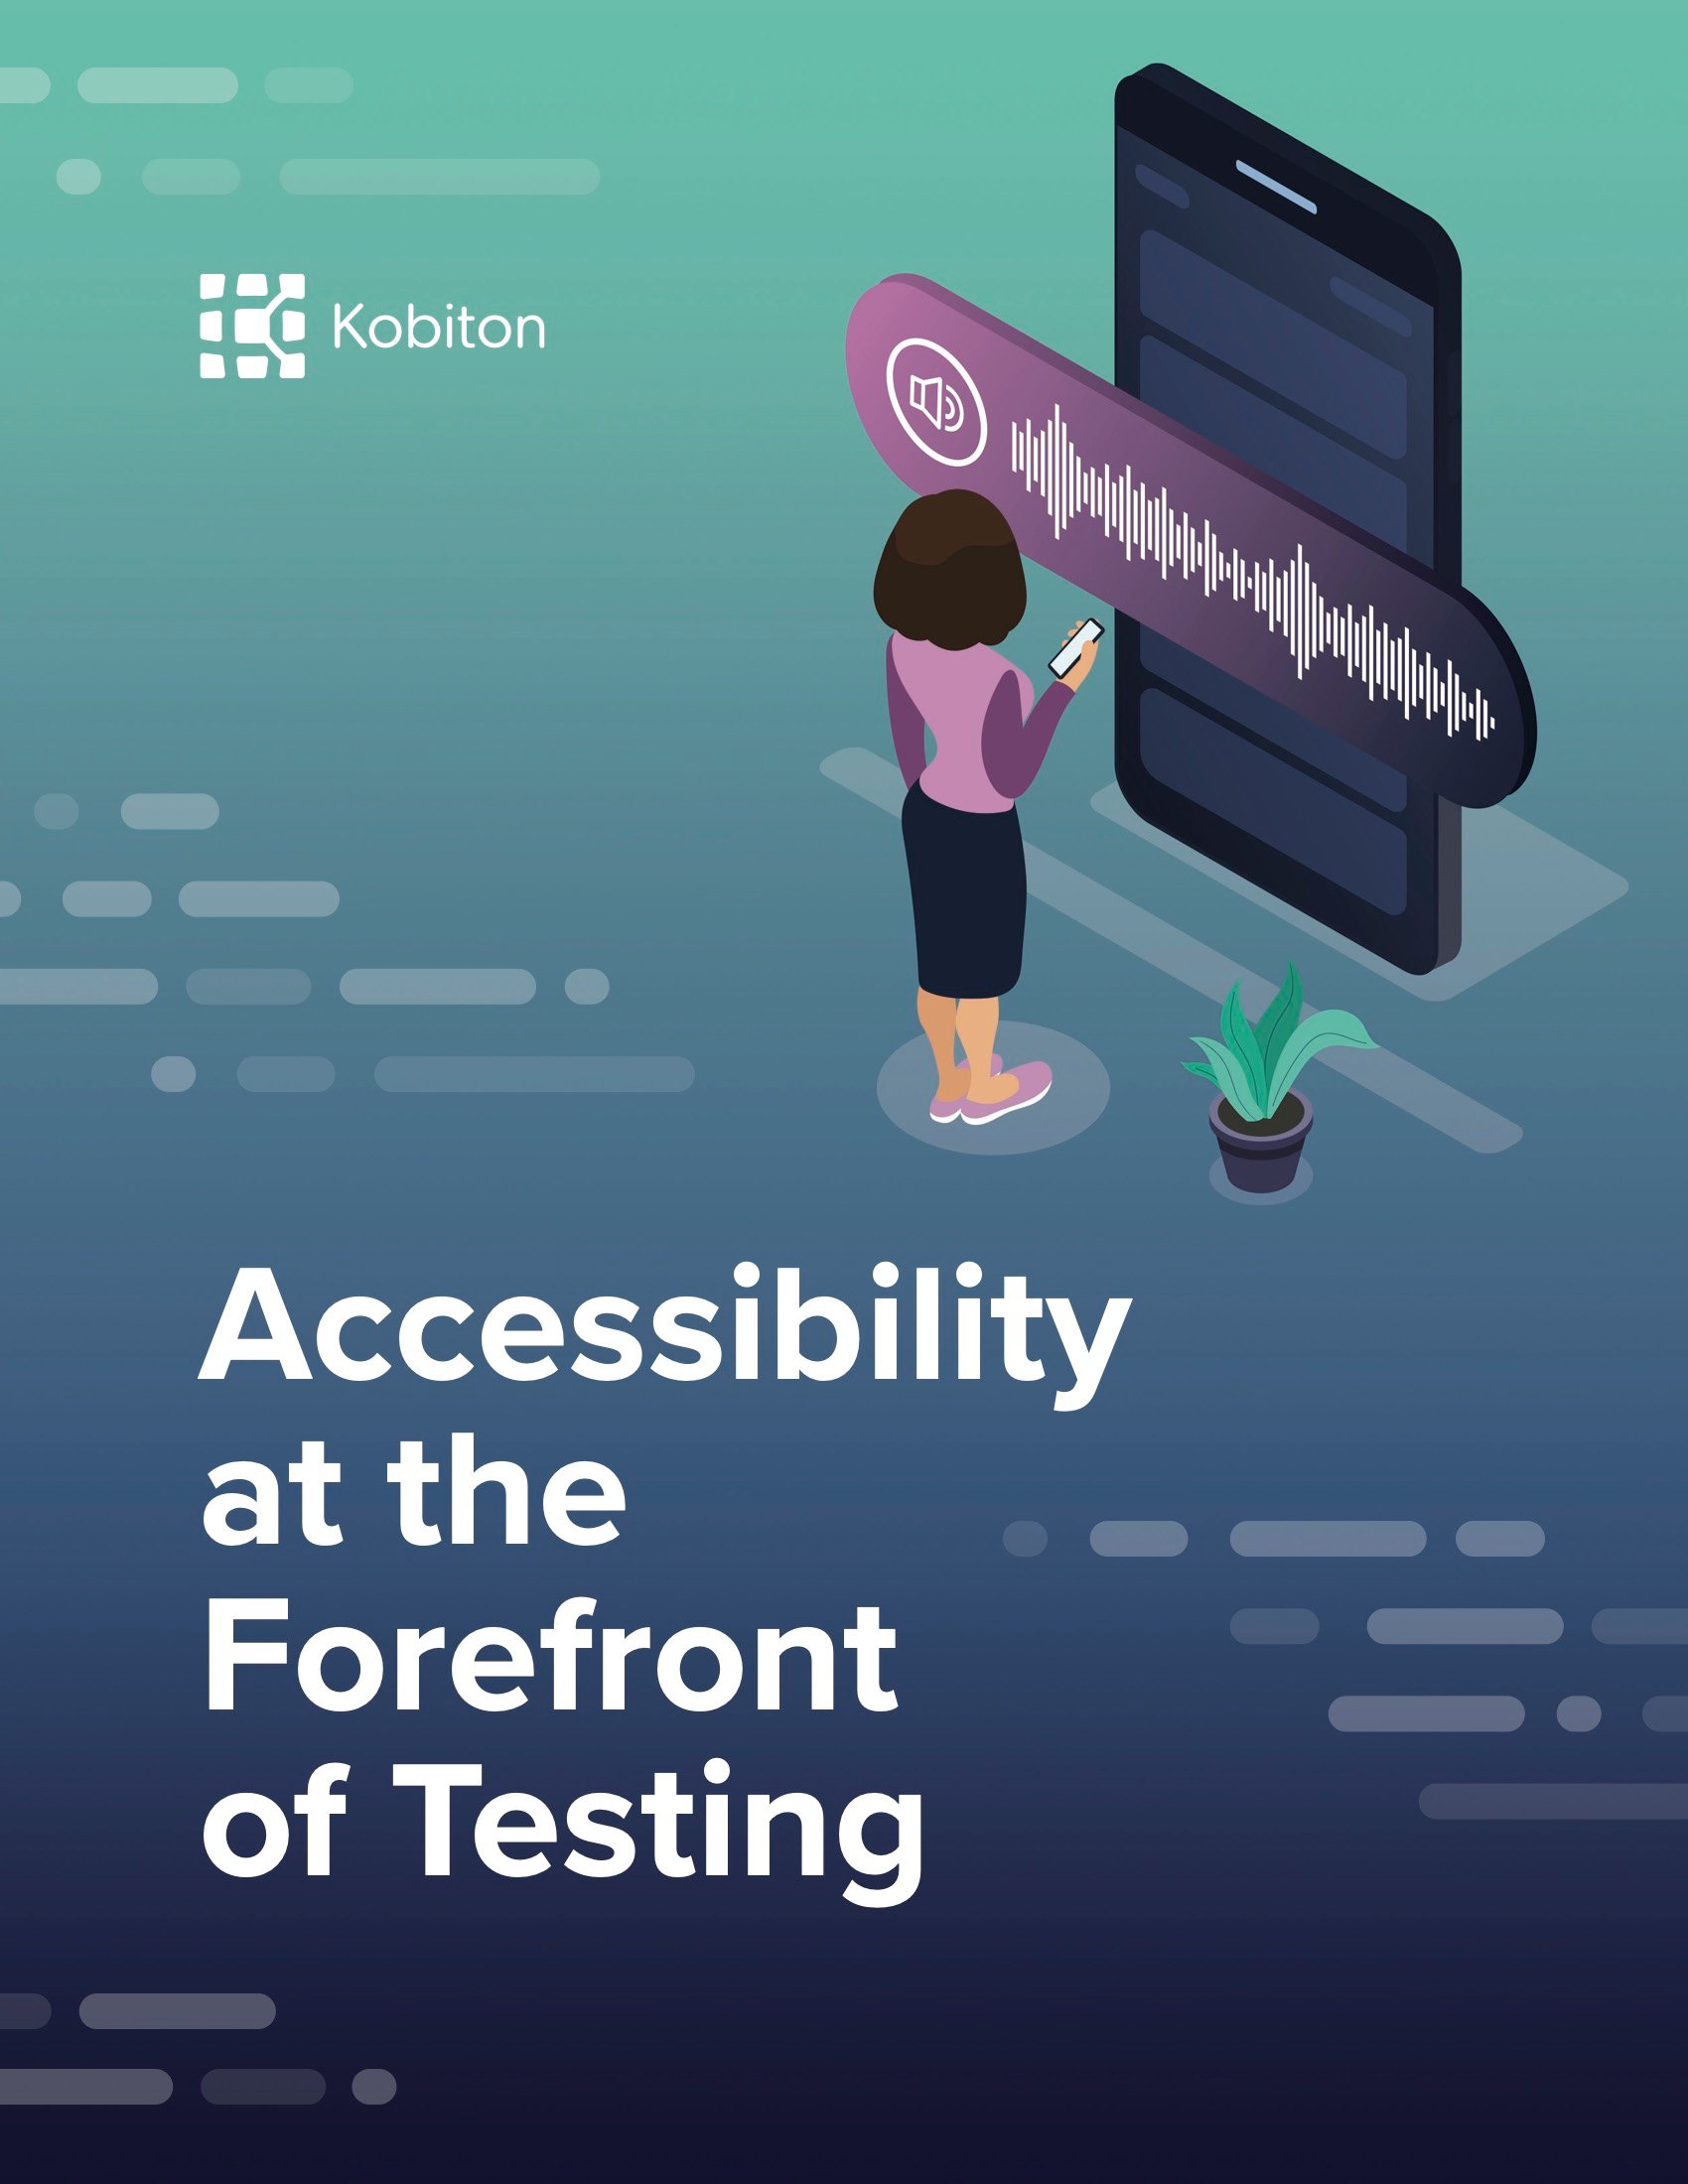 eGuide - Accessibility at the Forefront of Testing